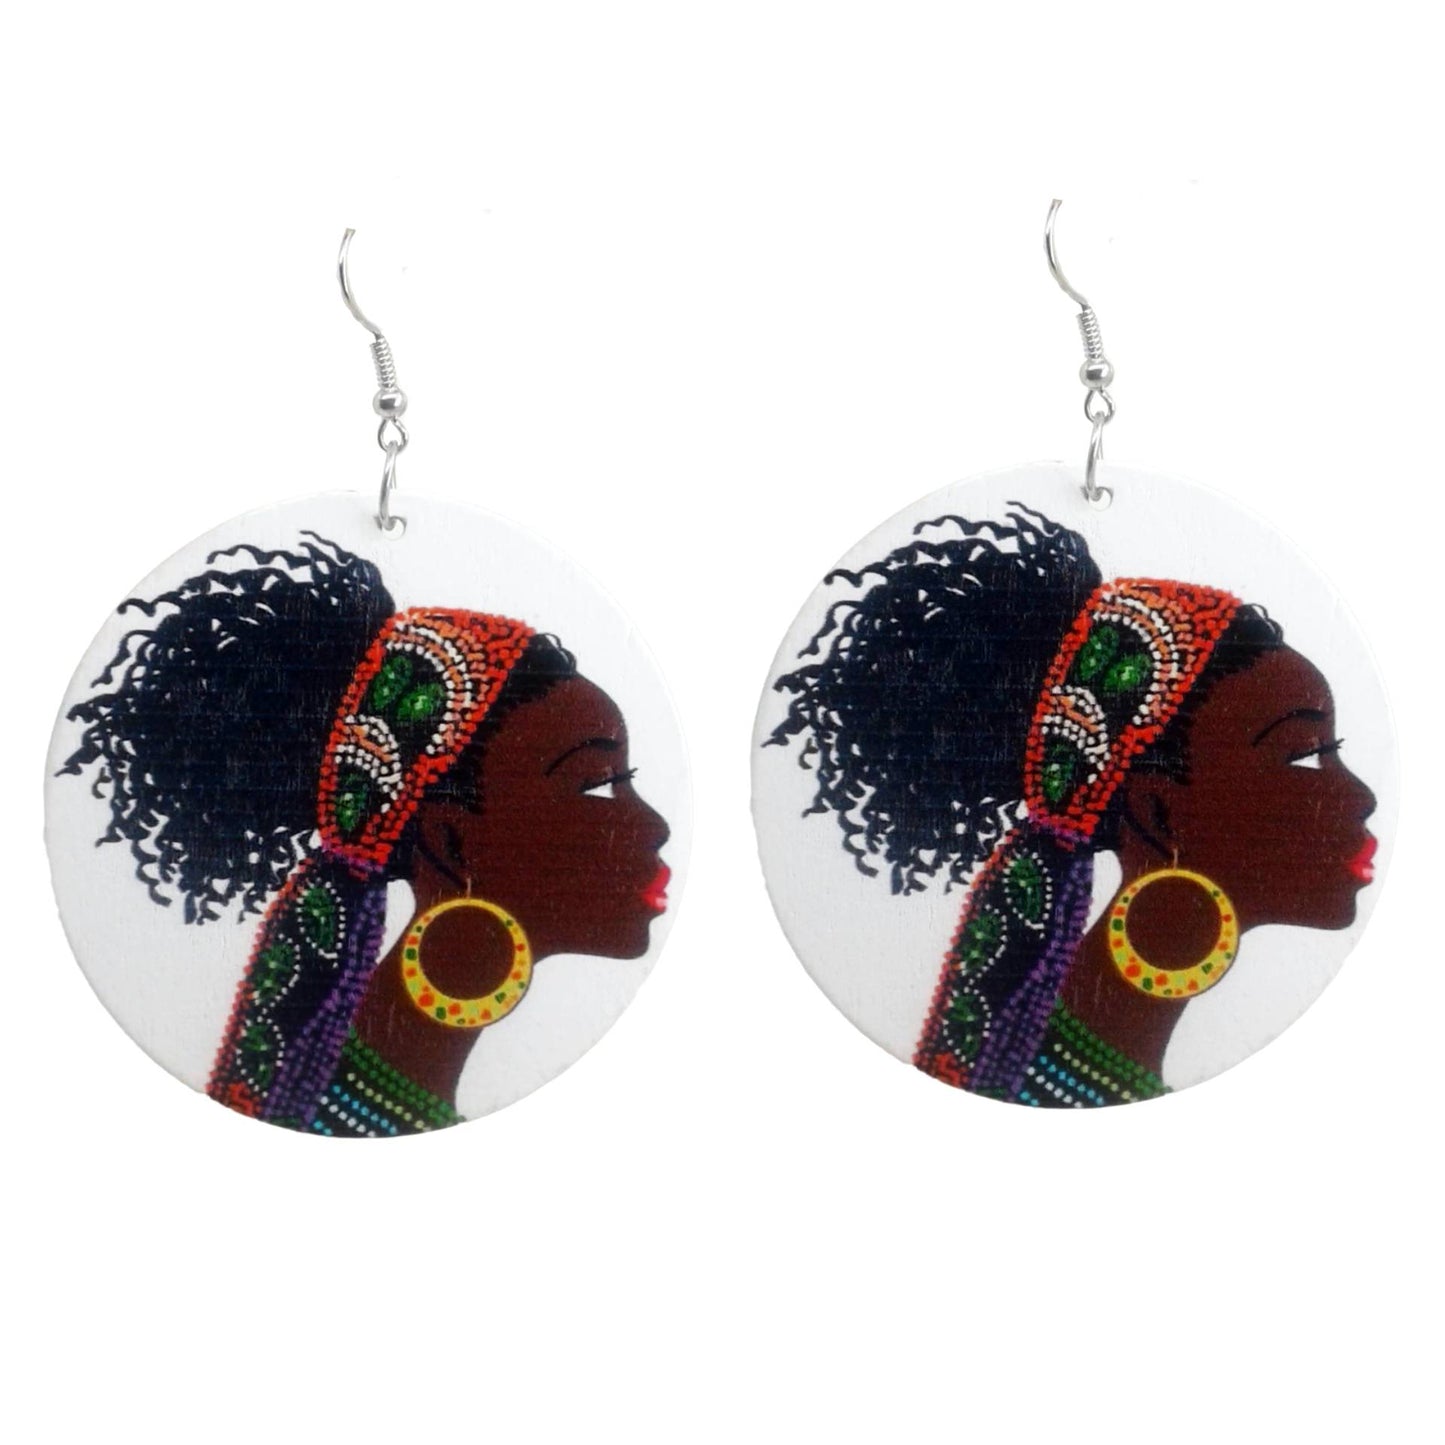 Round Wooden African Earrings featuring a beautiful black woman with braids wearing a headwrap.